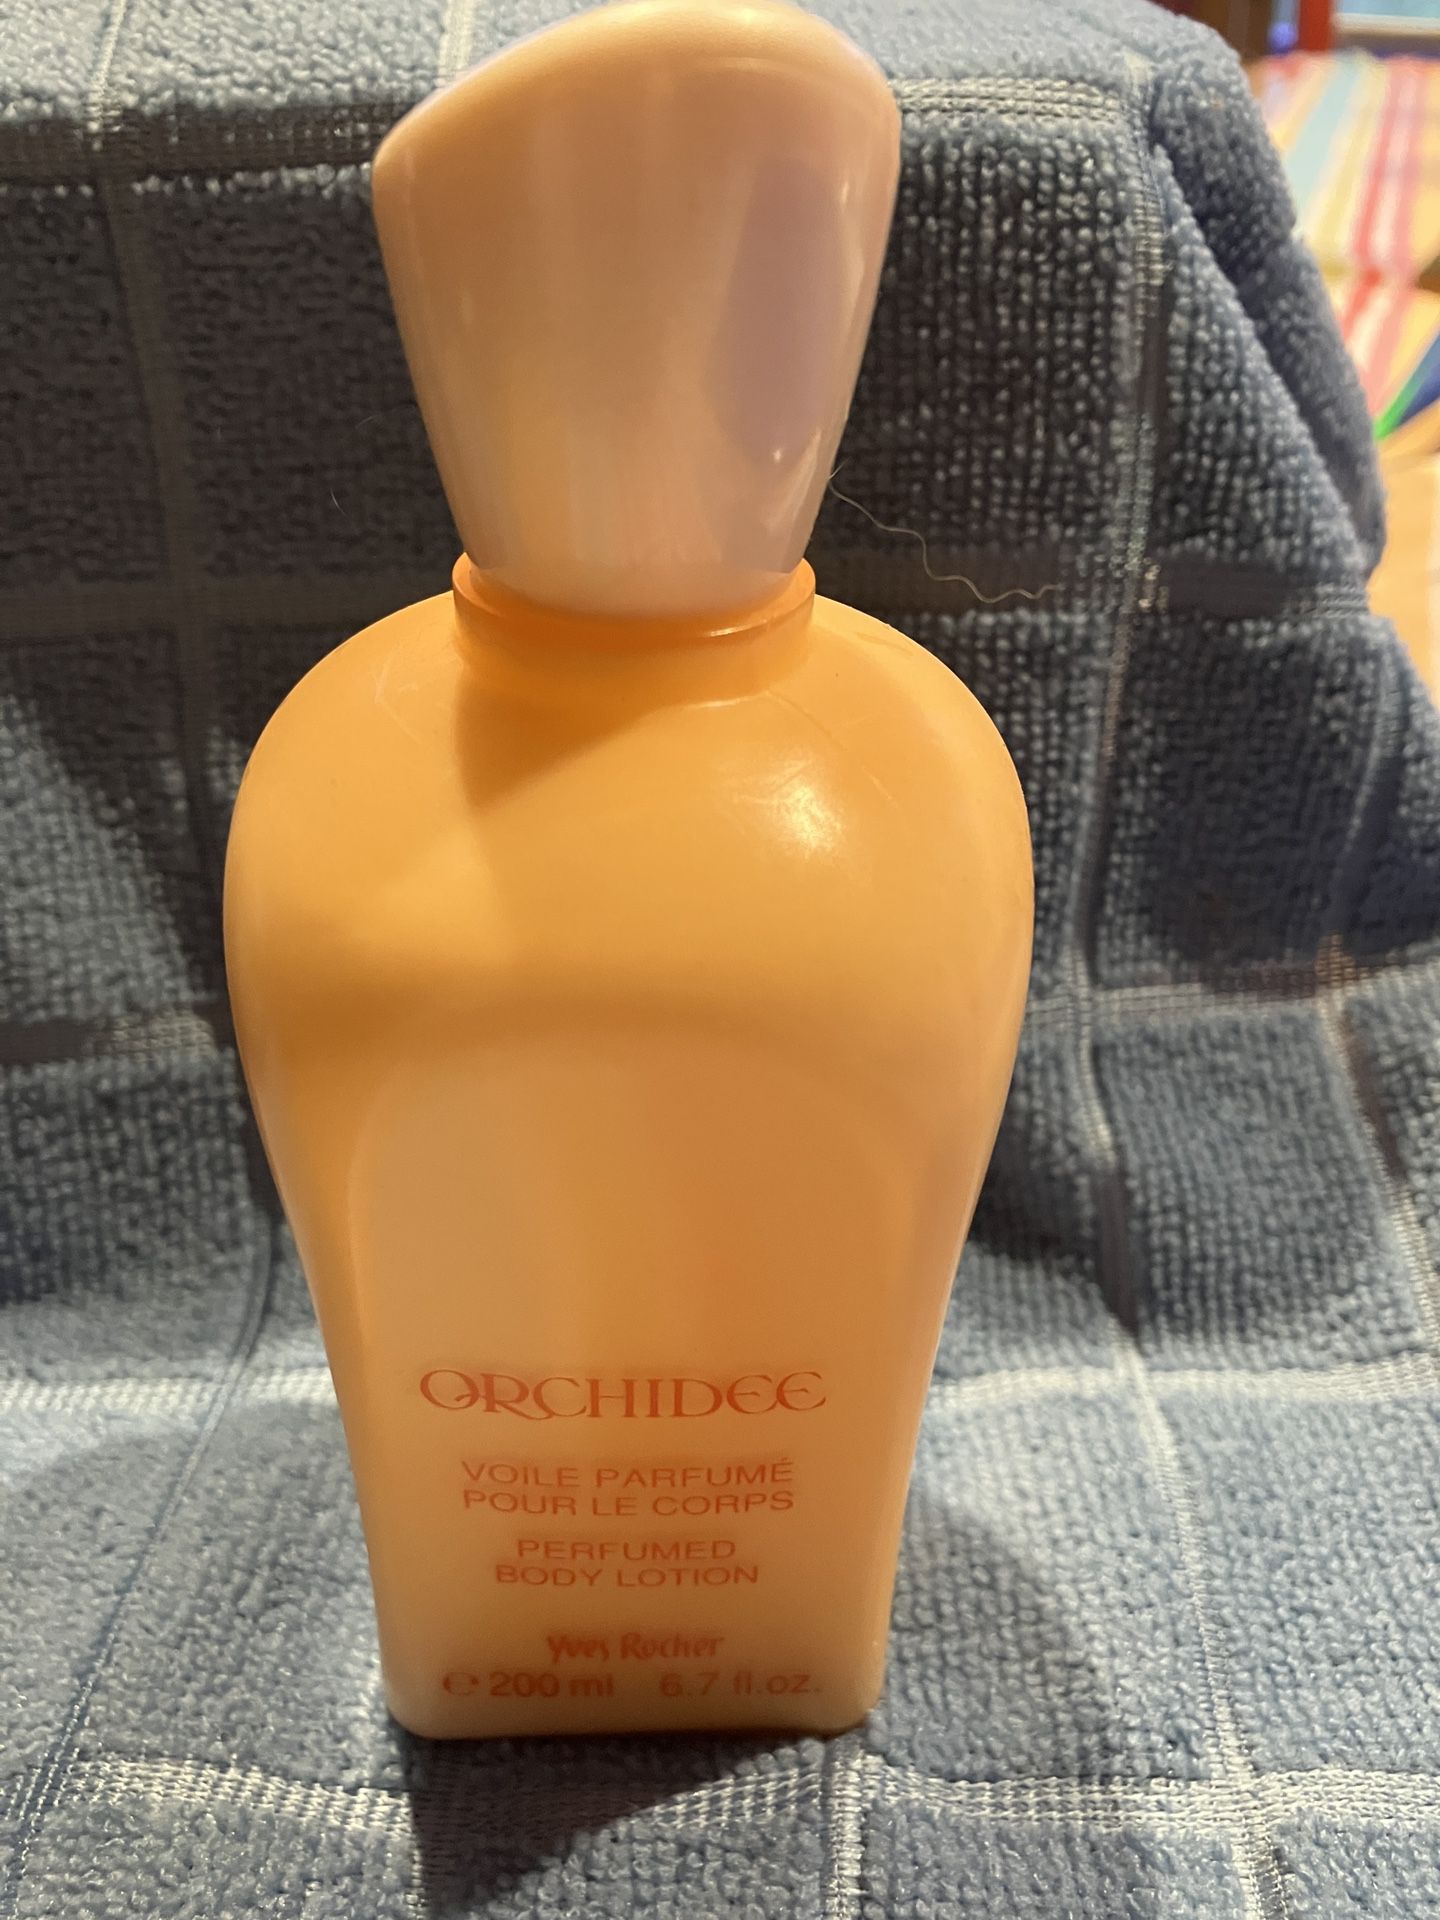 Yves rocher Orchidee Vintage Perfume Body Lotion